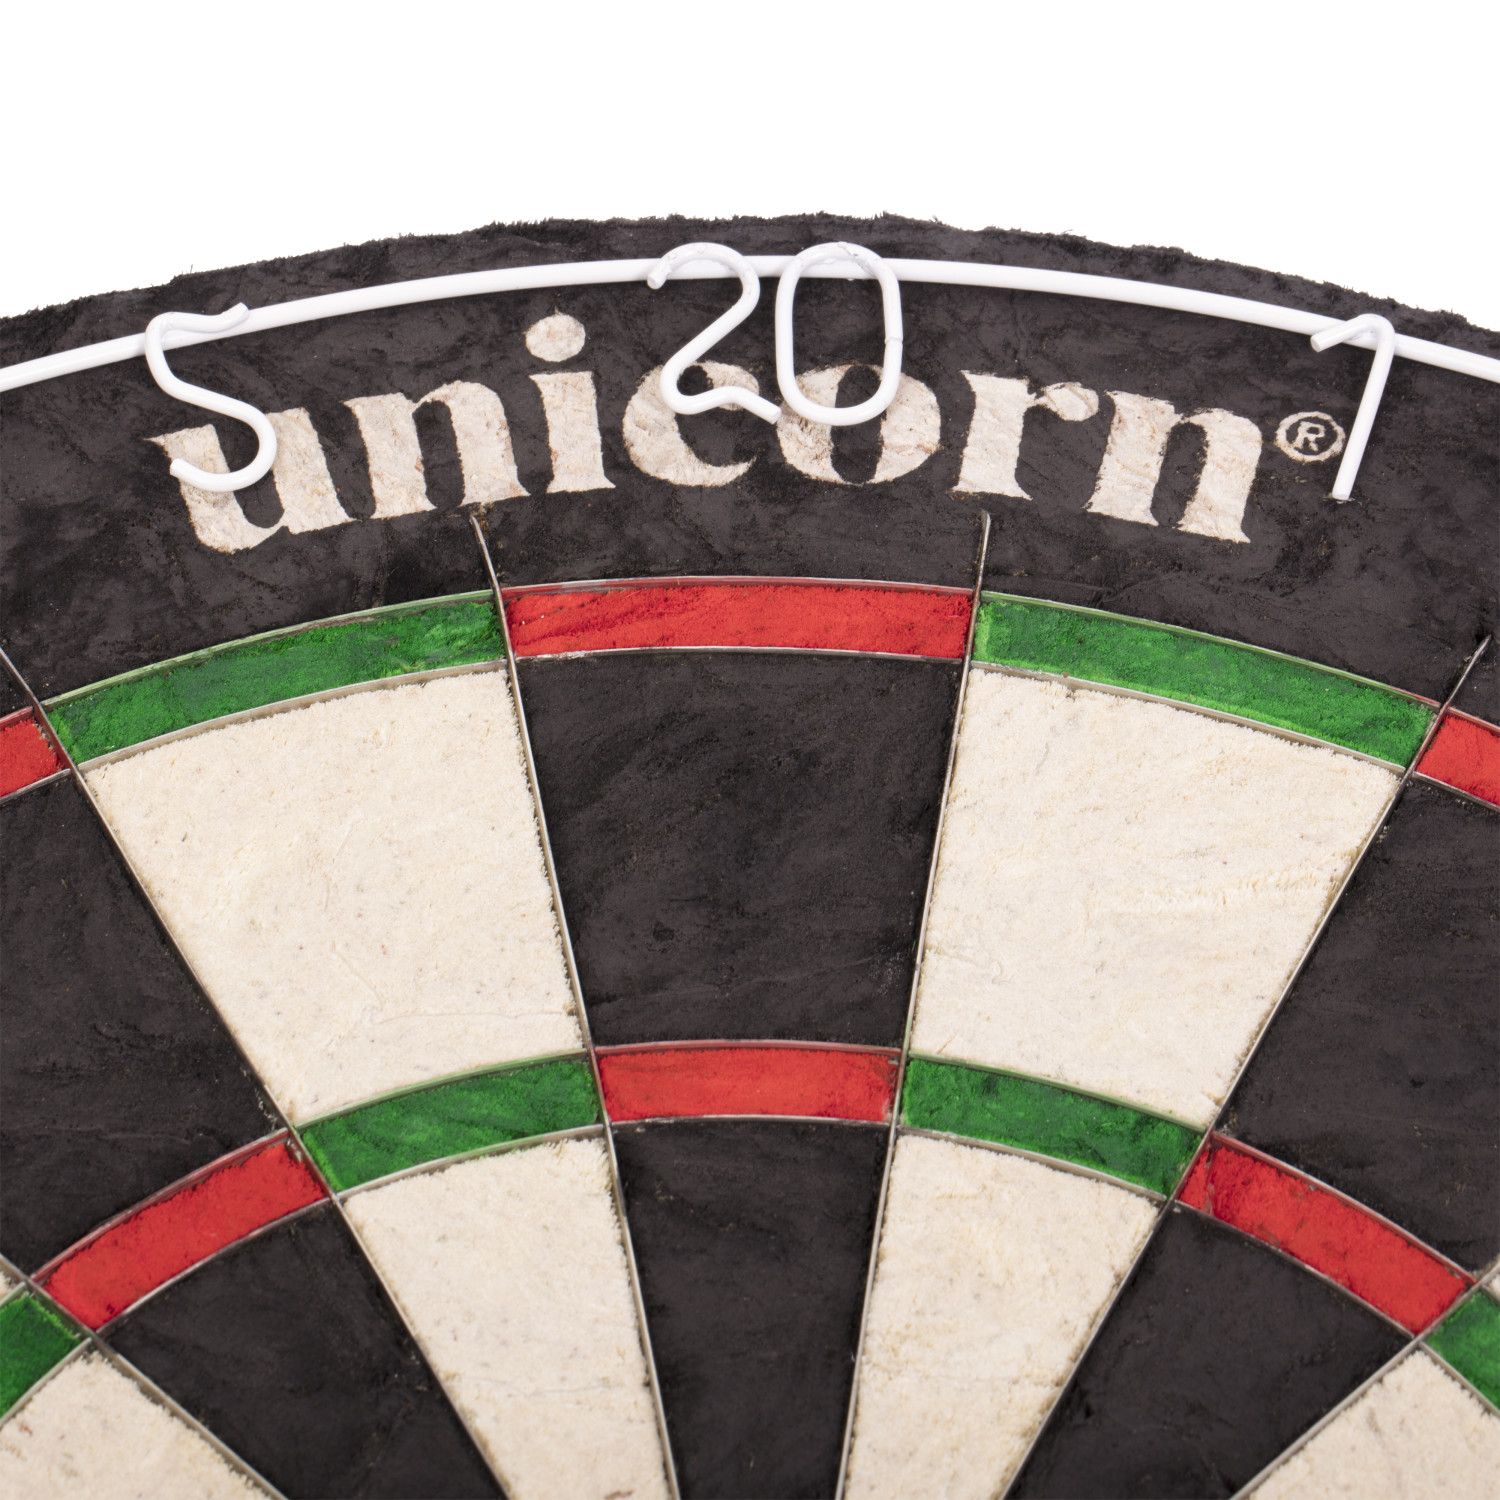 Unicorn Eclipse Pro Dart Board with Ultra slim Segmentation ? 30% Thinner Than Conventional Boards - image 2 of 9